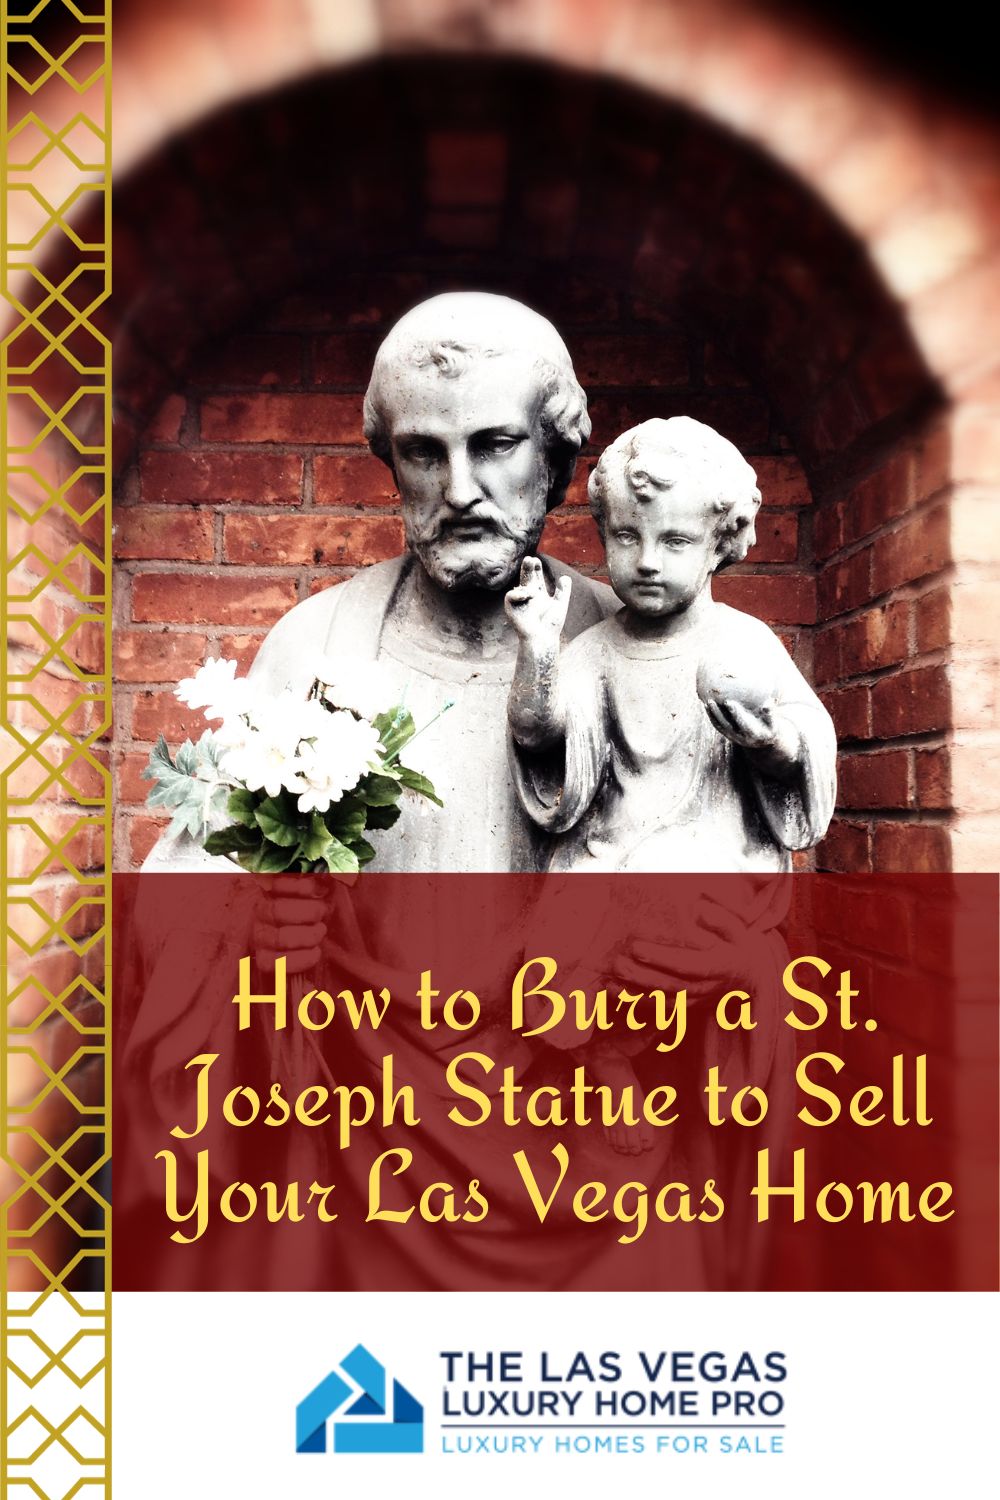 How to Bury a St. Joseph Statue to Sell Your Las Vegas Home